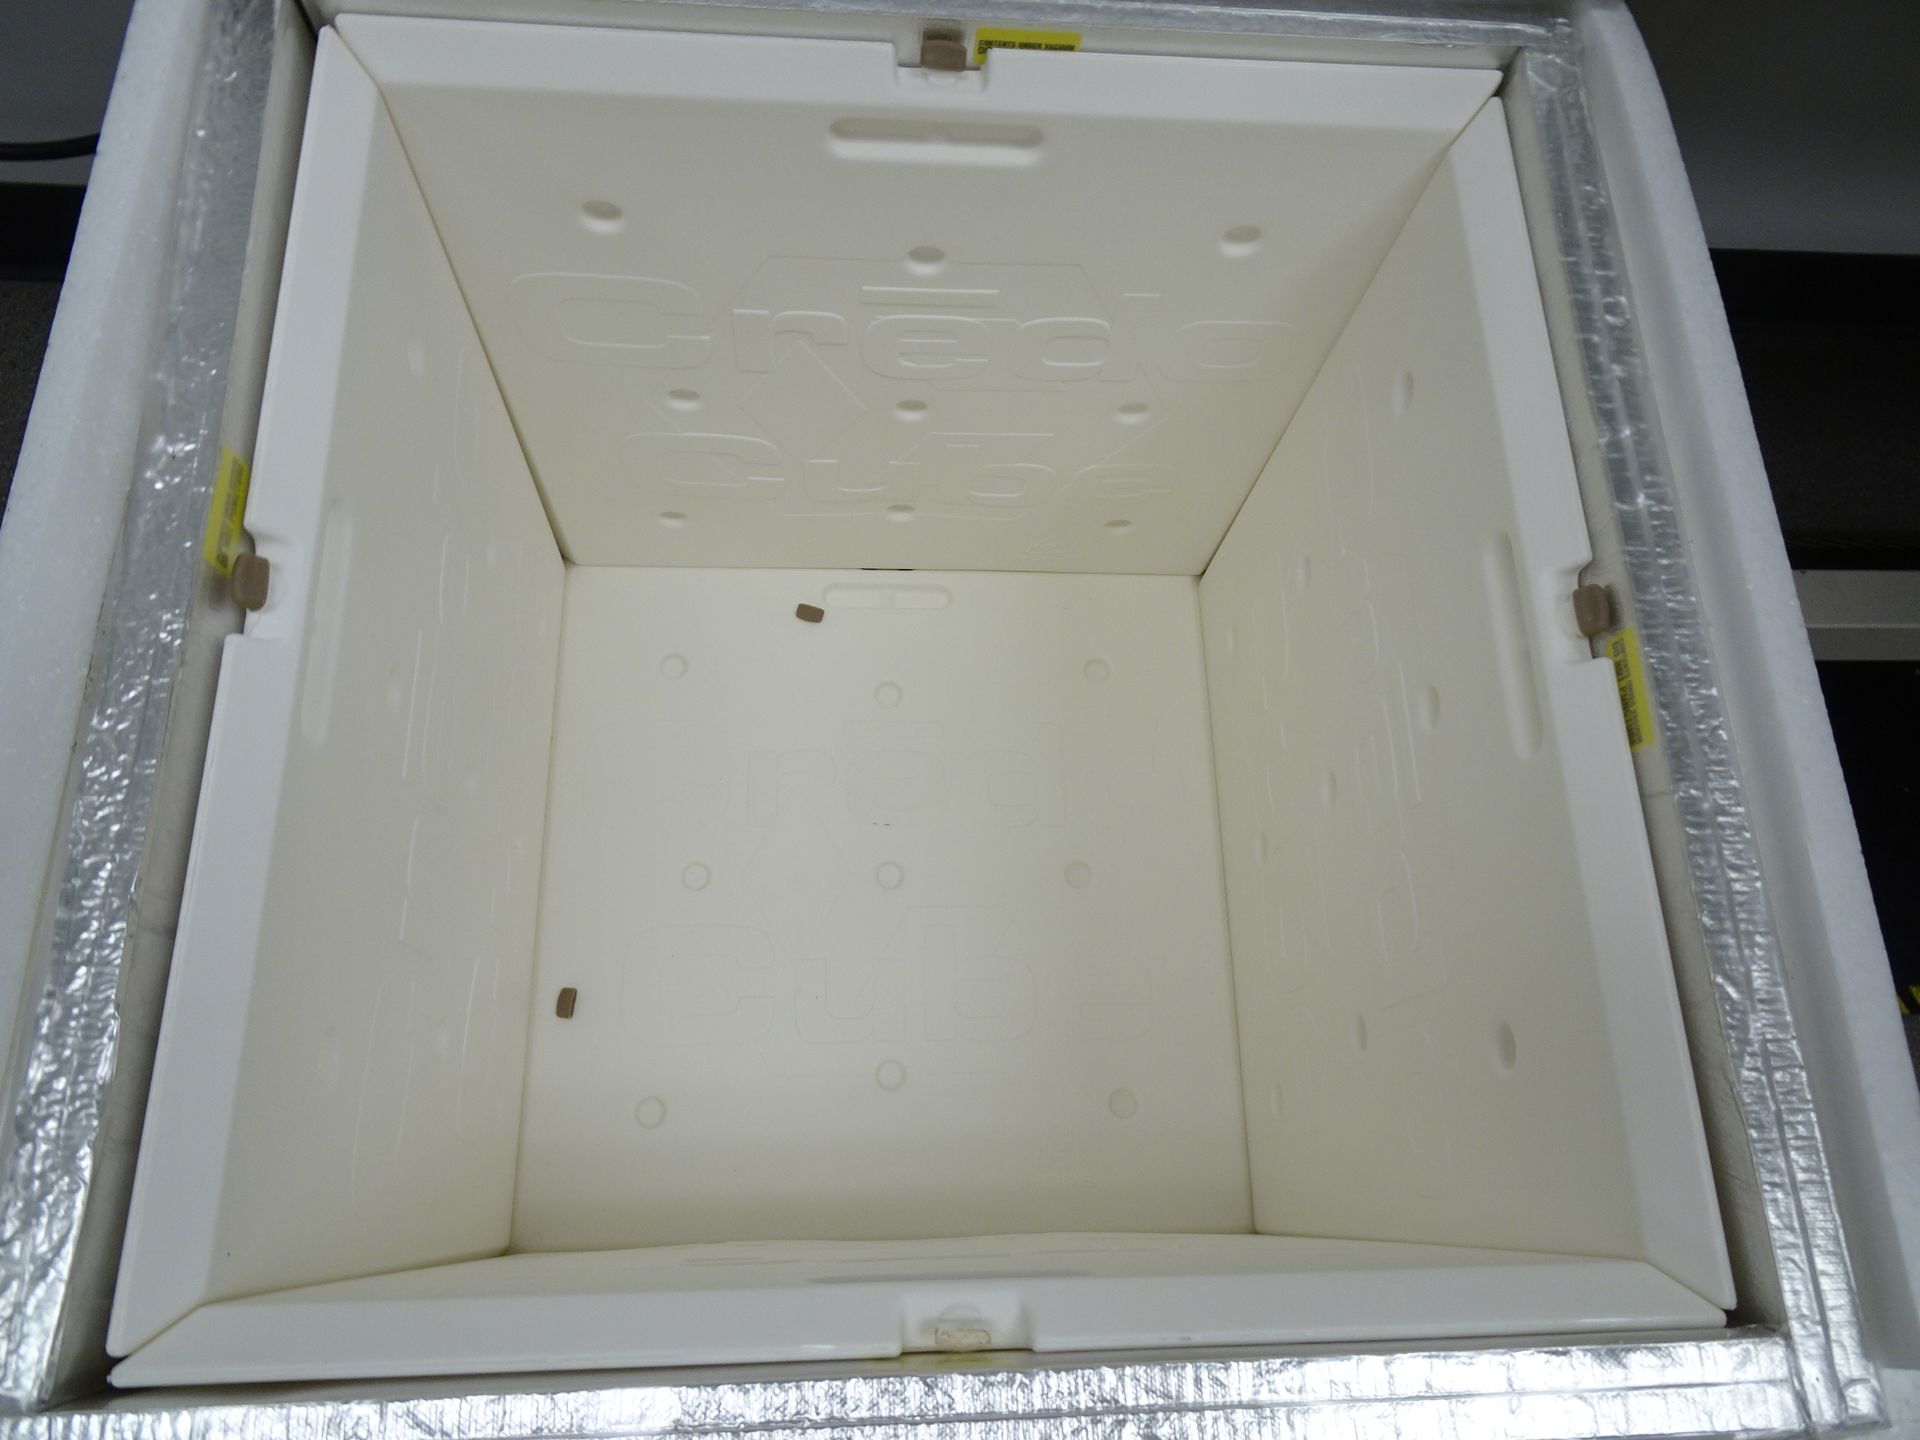 Credo Thermal Packaging Solutions - Image 6 of 7